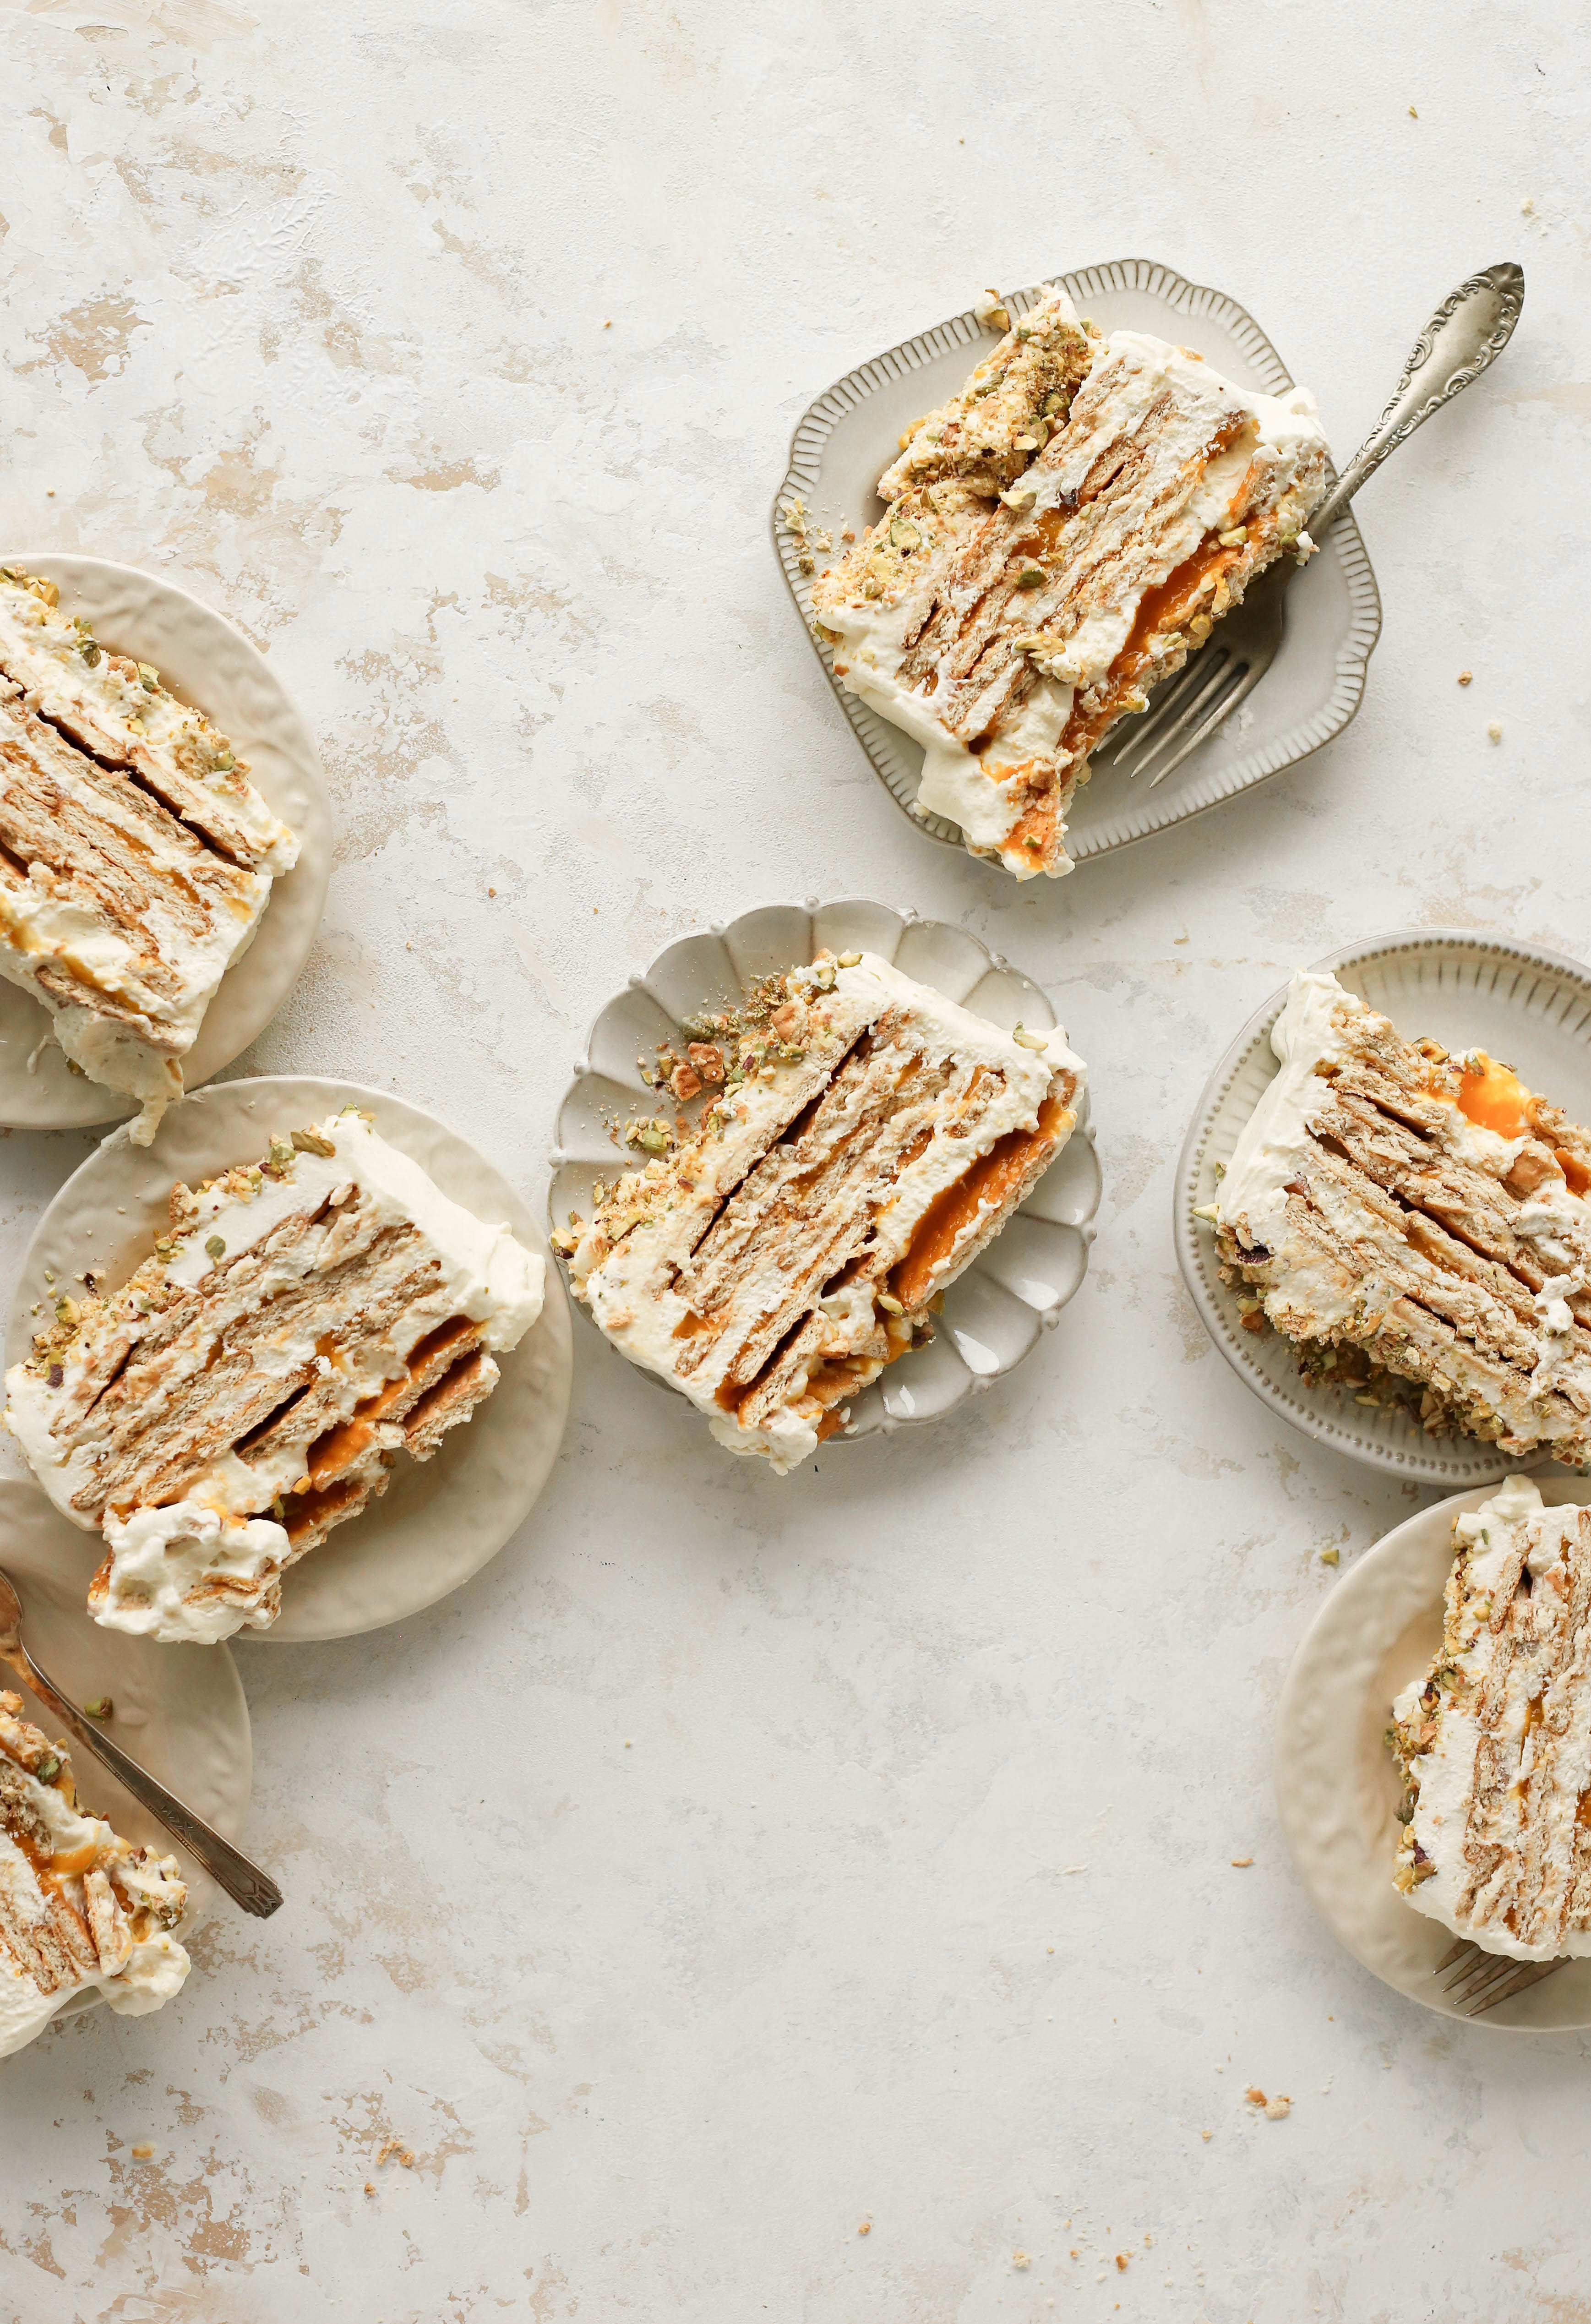 celebrate summer with this no bake mango and cardamom cream icebox cake with a salty pistachio crumble